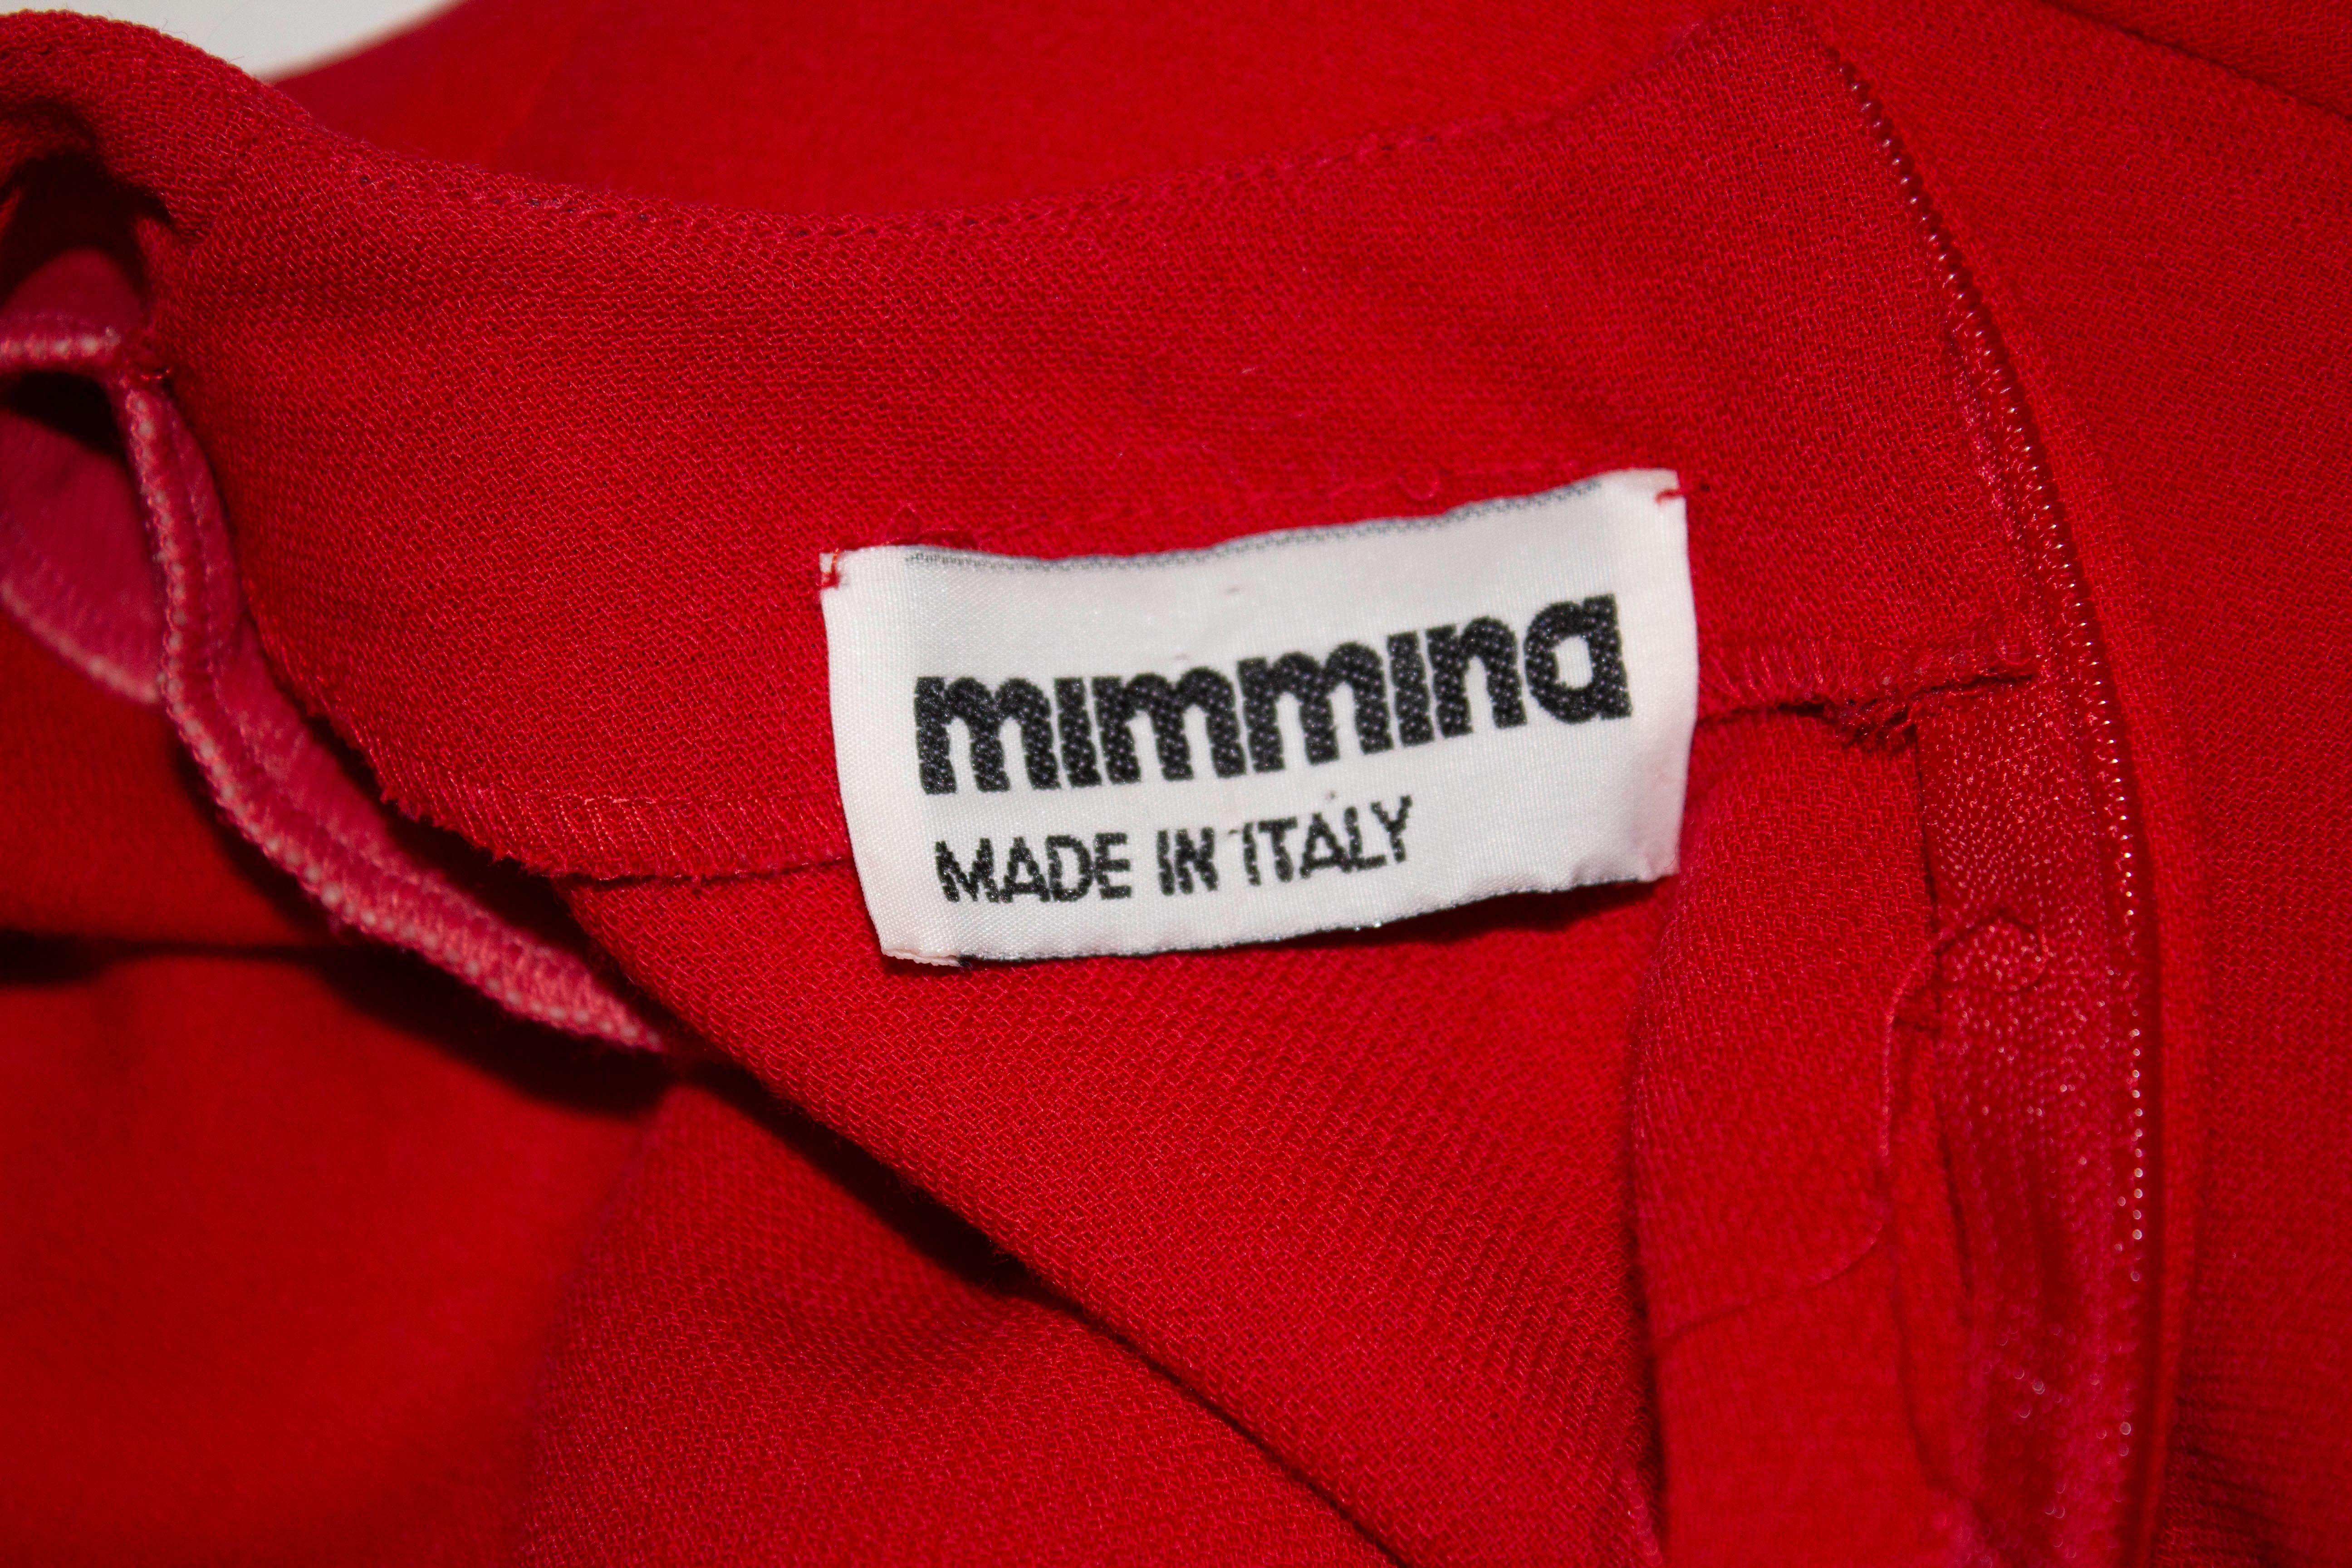 A chic and easy to wear red crepe dress by Mimmina of Italy. The dress is in excellent condition and has gathering at the front and shoulder pads. It is unlined. 

Measurements: Bust 37/8'', waist 30'', length 40''